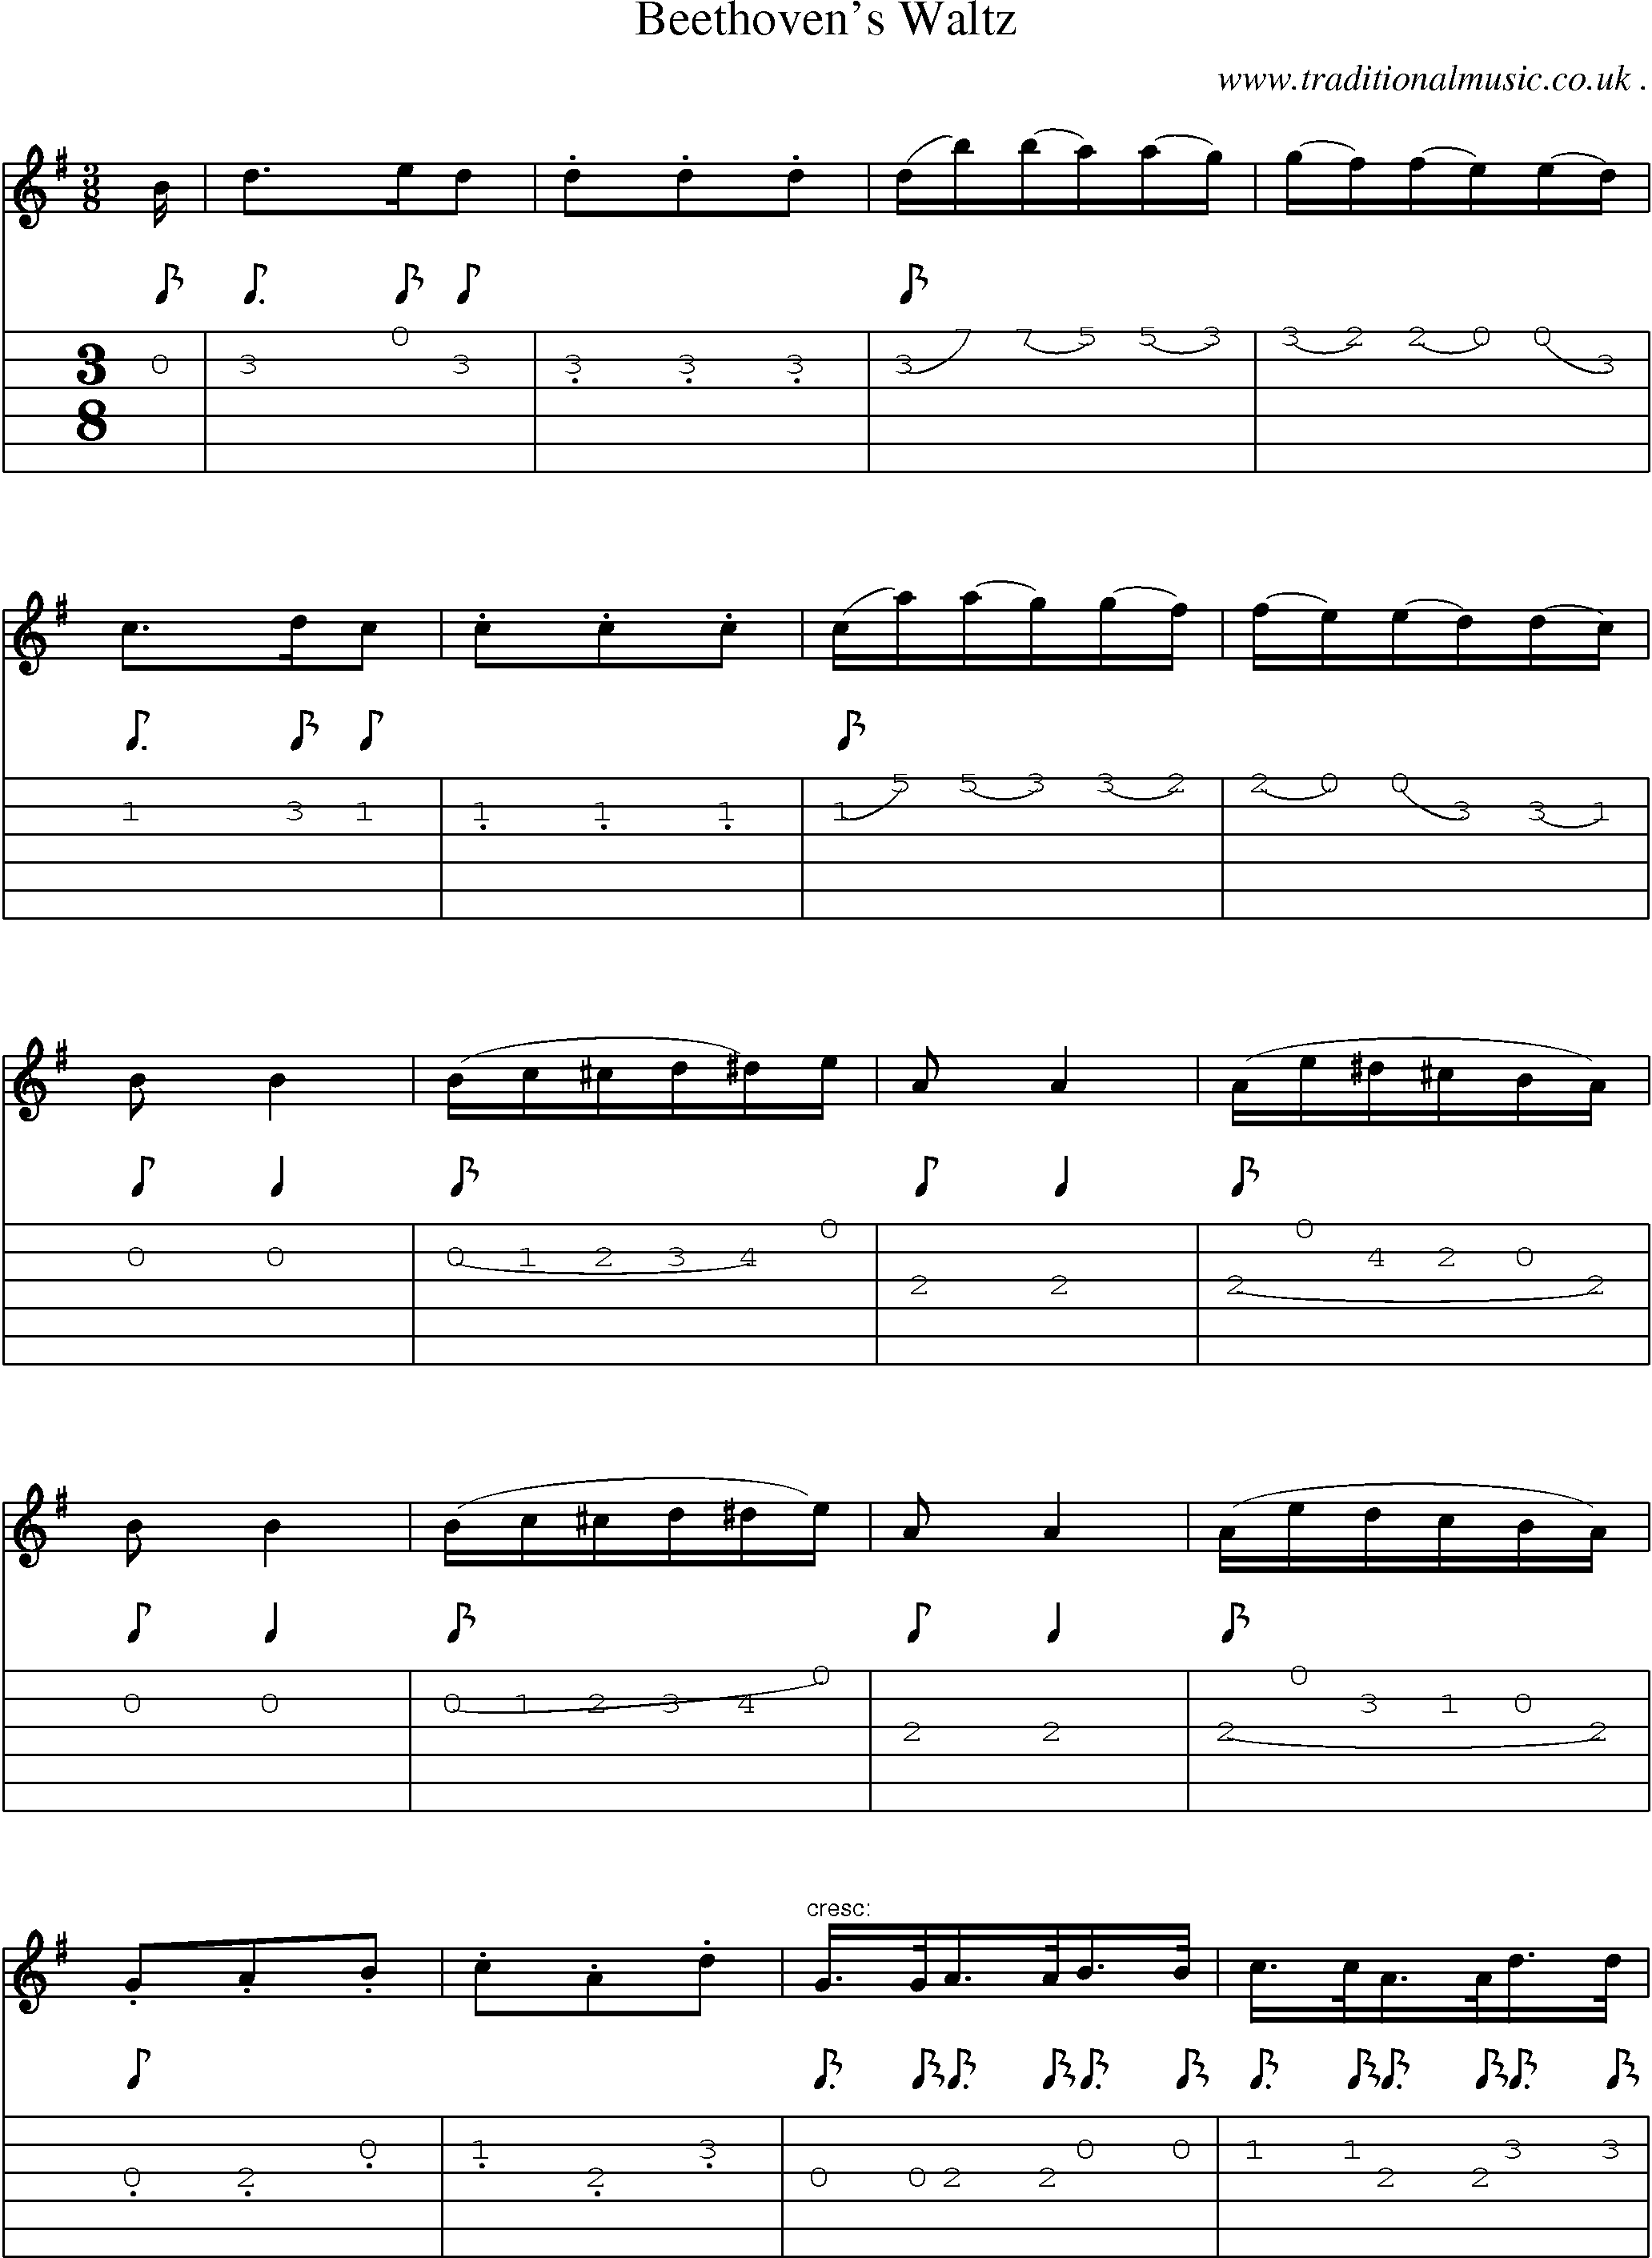 Sheet-Music and Guitar Tabs for Beethovens Waltz